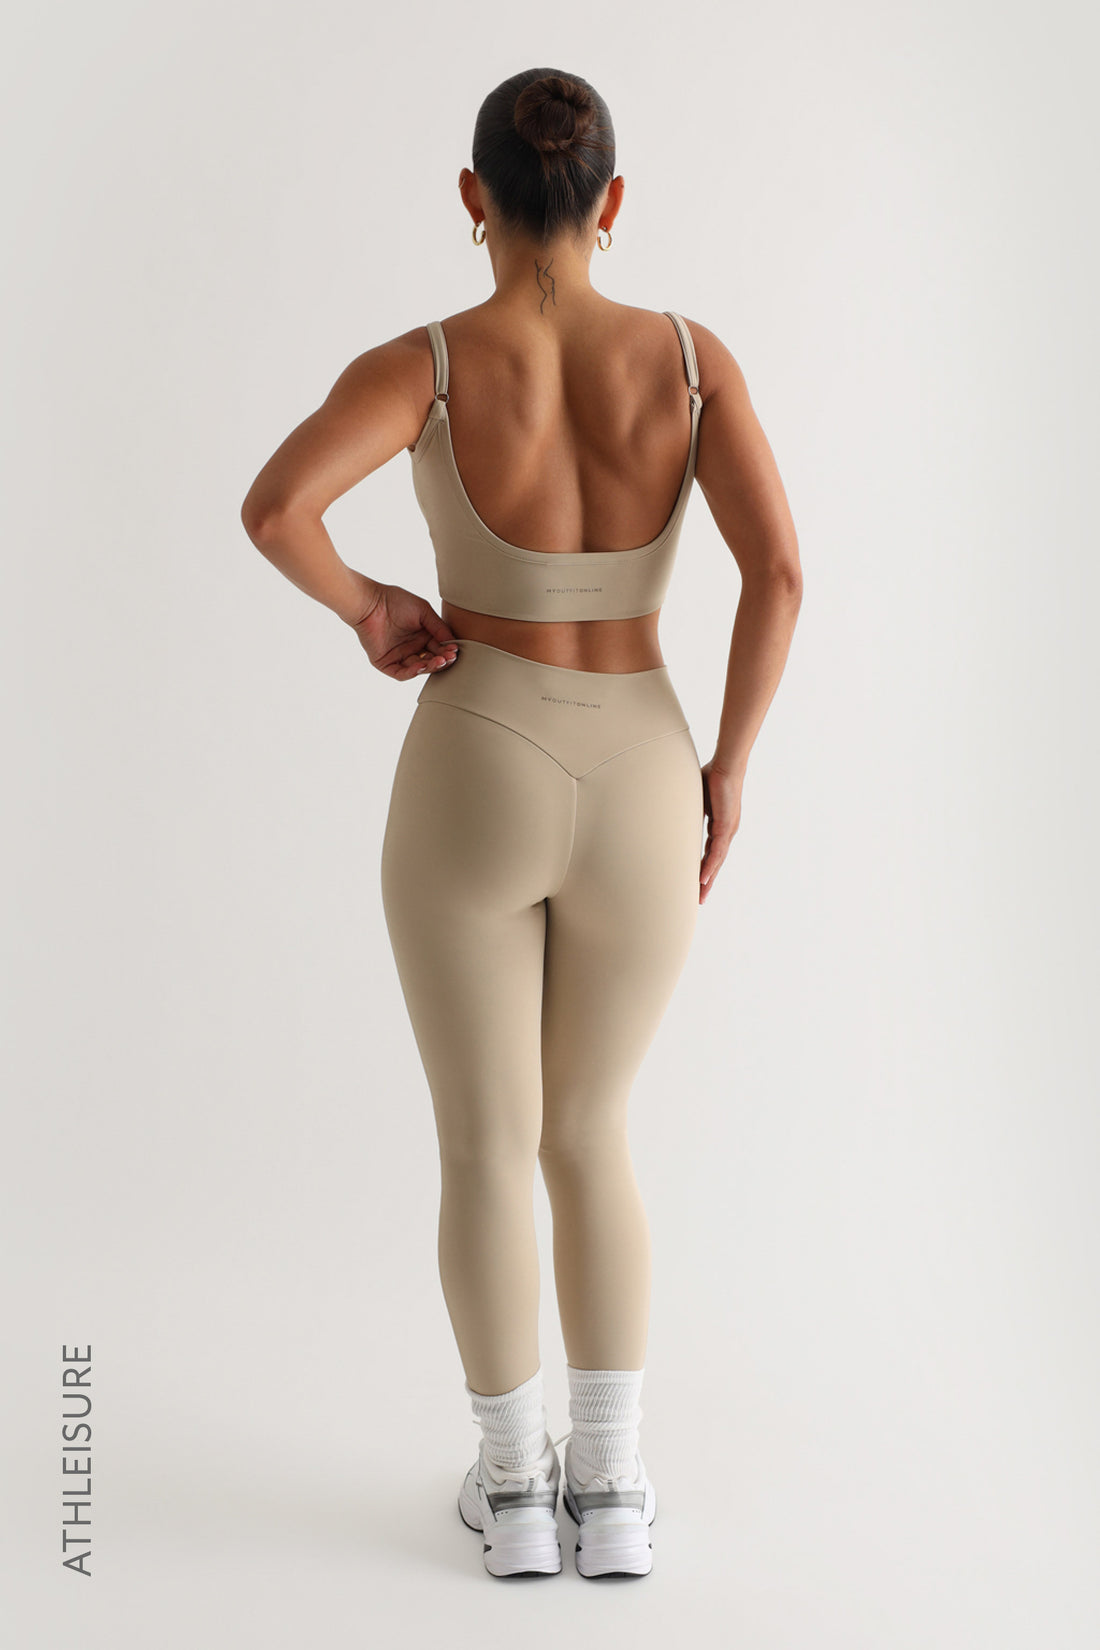 Just High Waisted Mesh Leggings- Beige – My Outfit Online